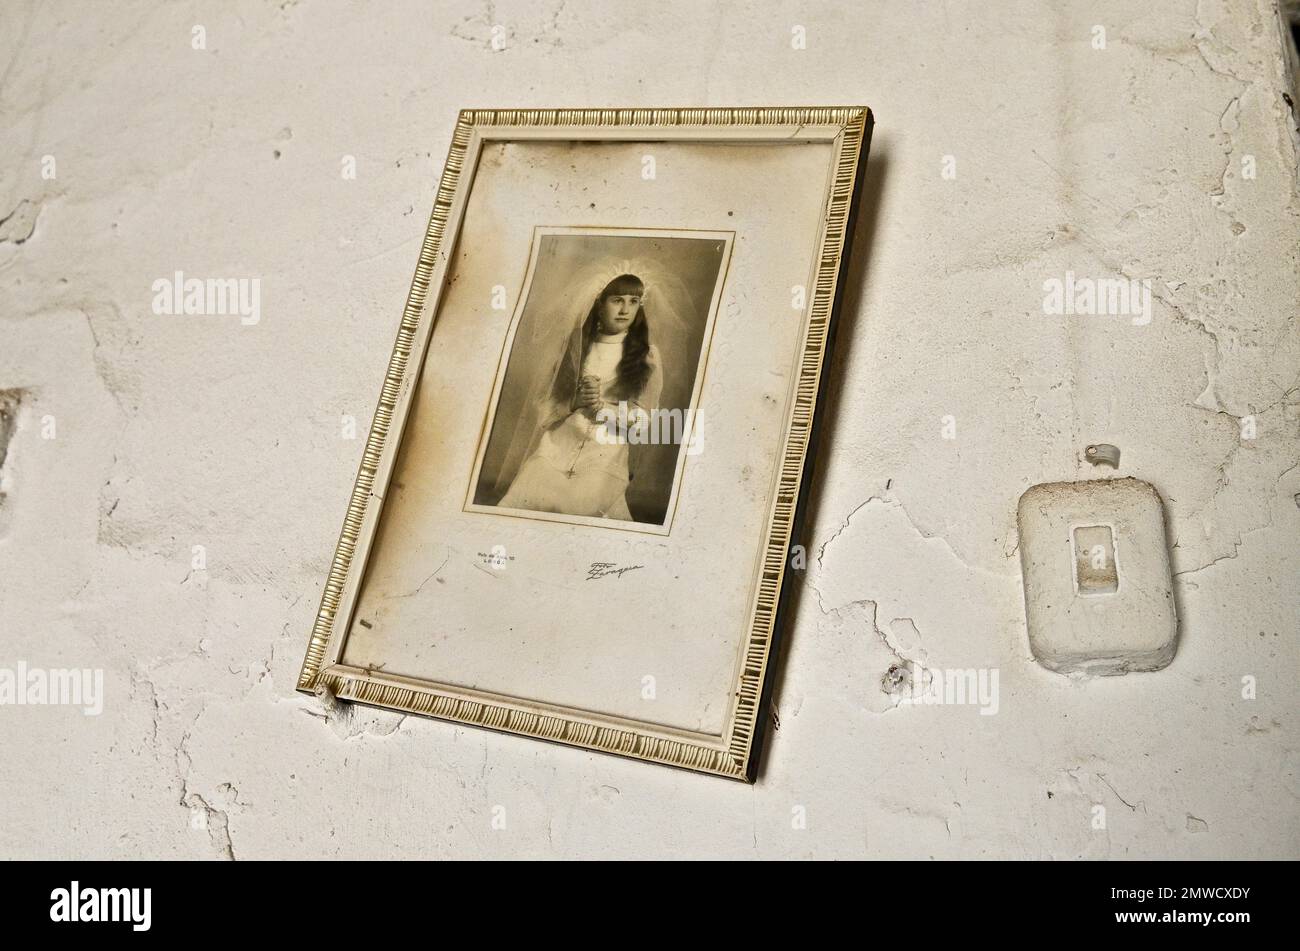 Framed photo on white wall of girl at communion, wall with picture and light switch, Spain Stock Photo